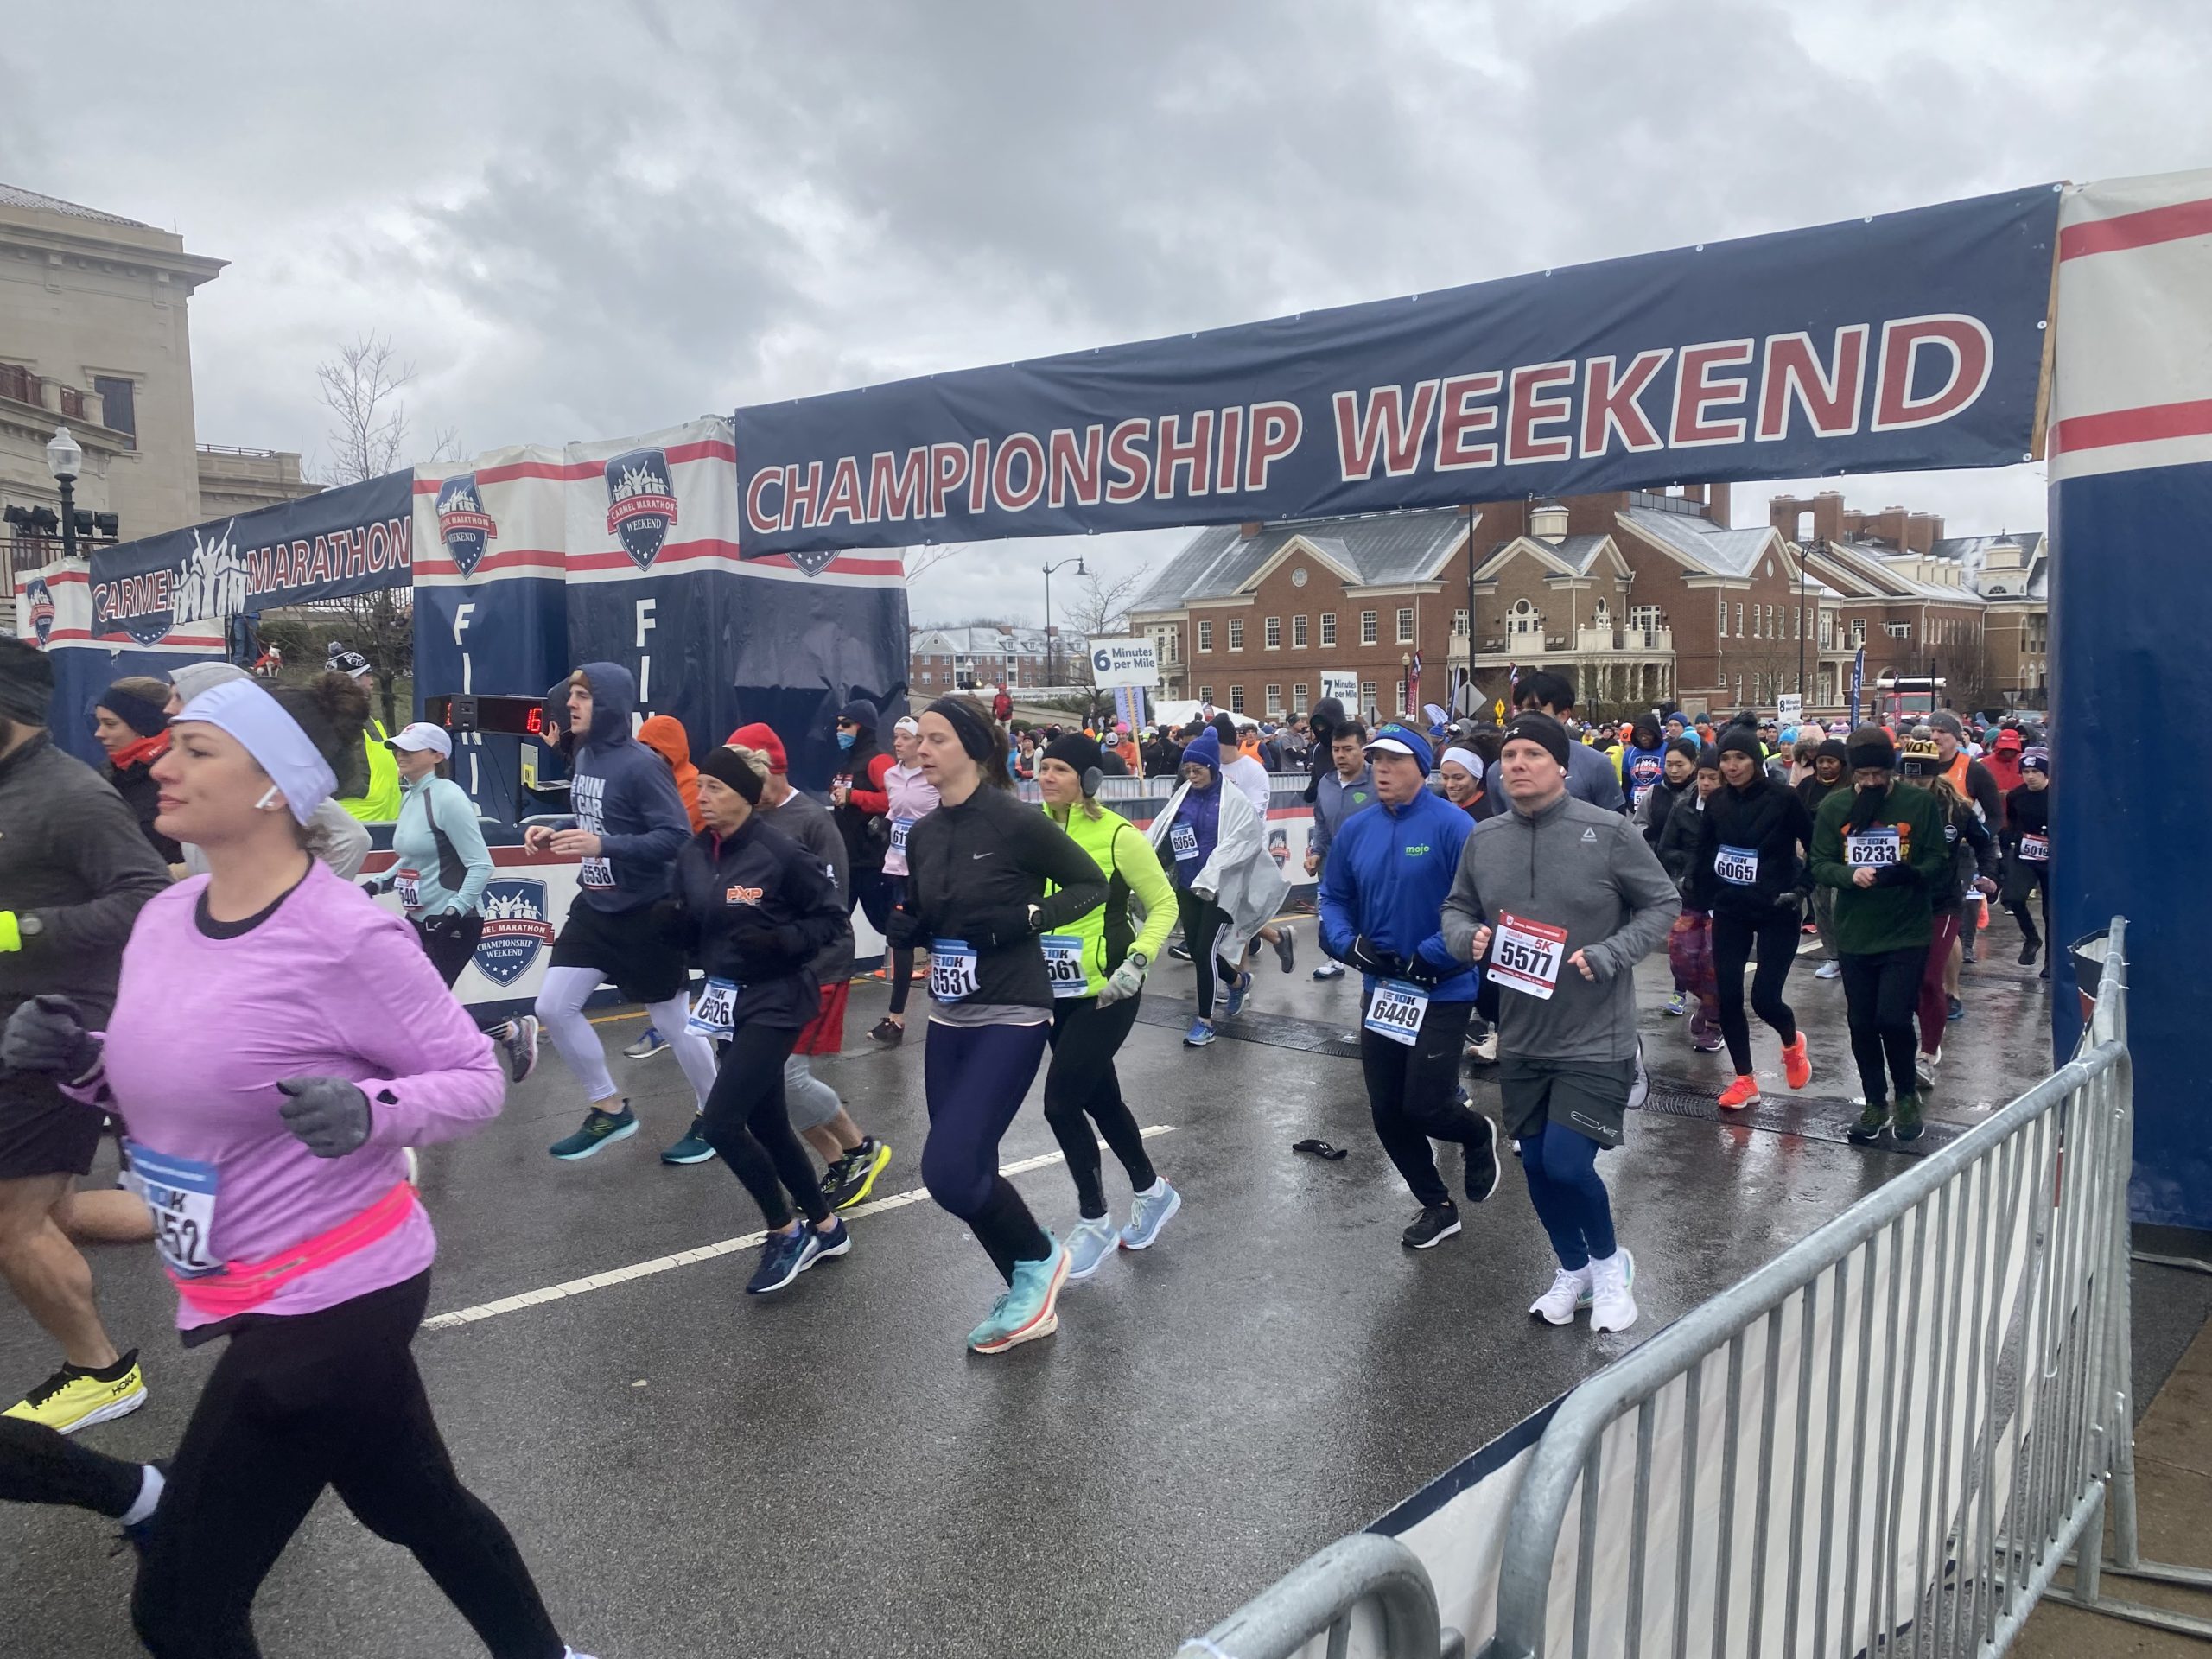 Carmel Marathon Weekend Finishers Post New Records Despite Cold and